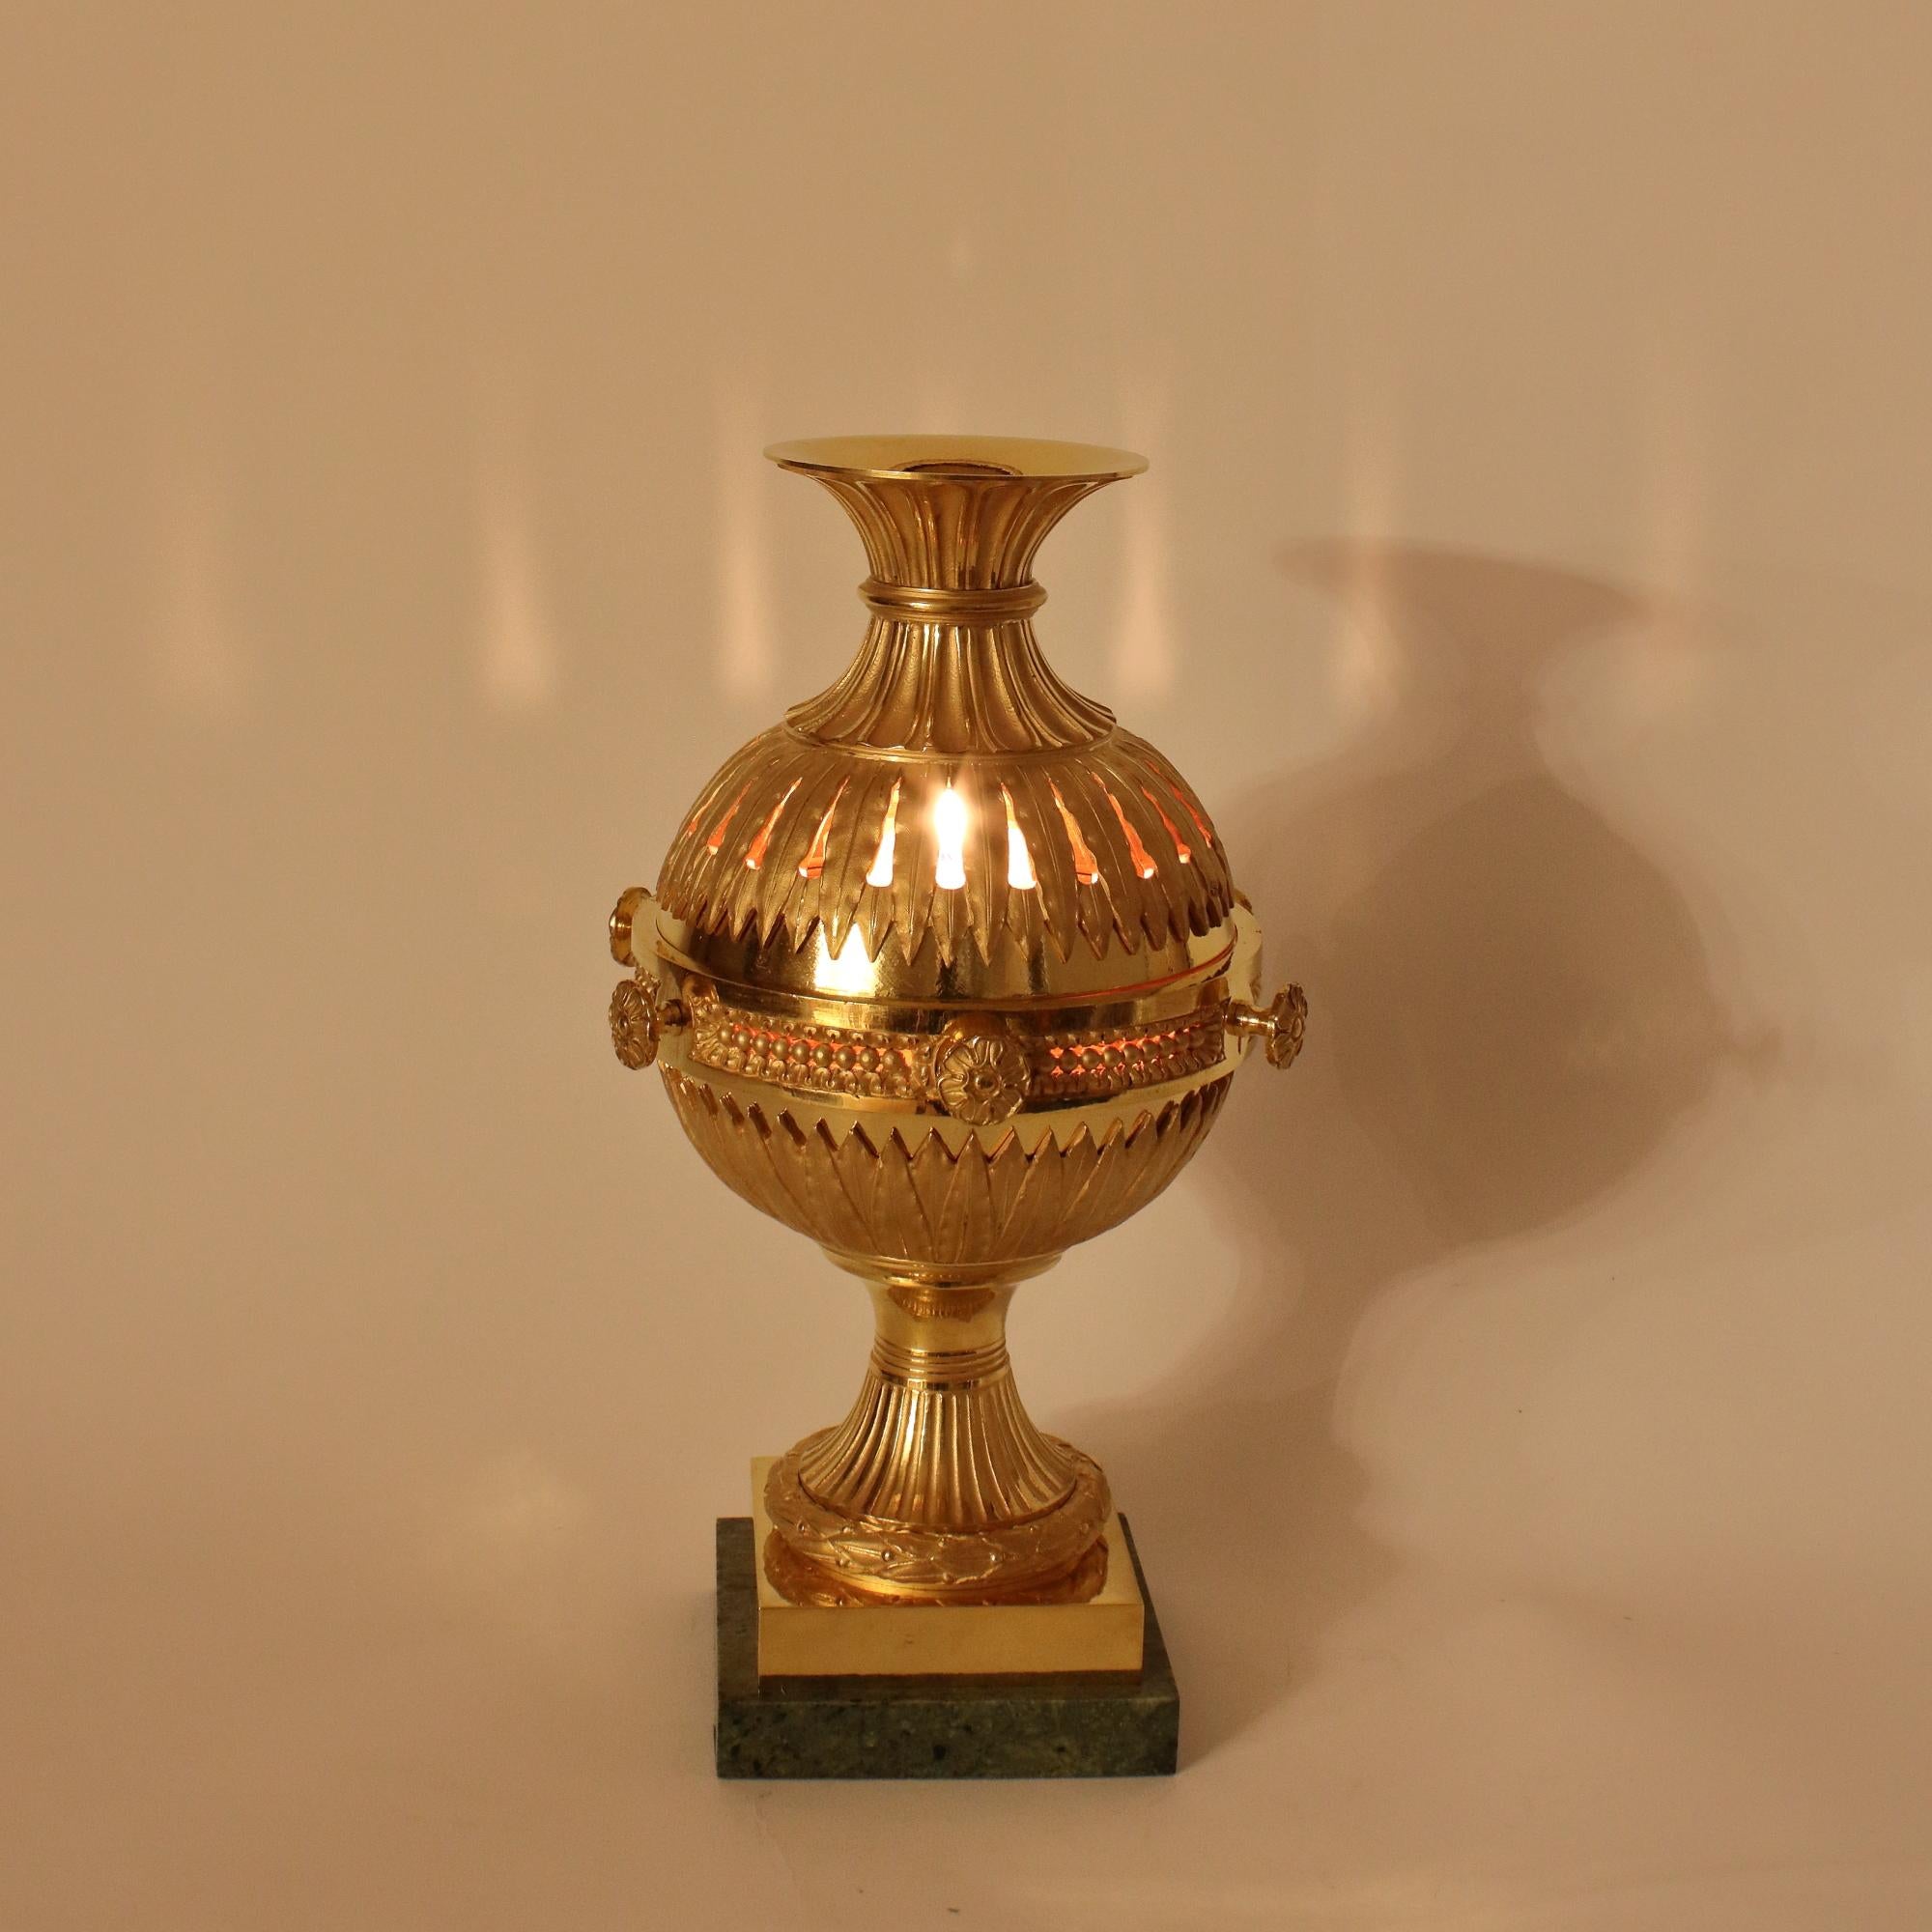 French Late 18thh Century Louis XVI Gilt Bronze Incense Burner or Brule Parfum For Sale 7